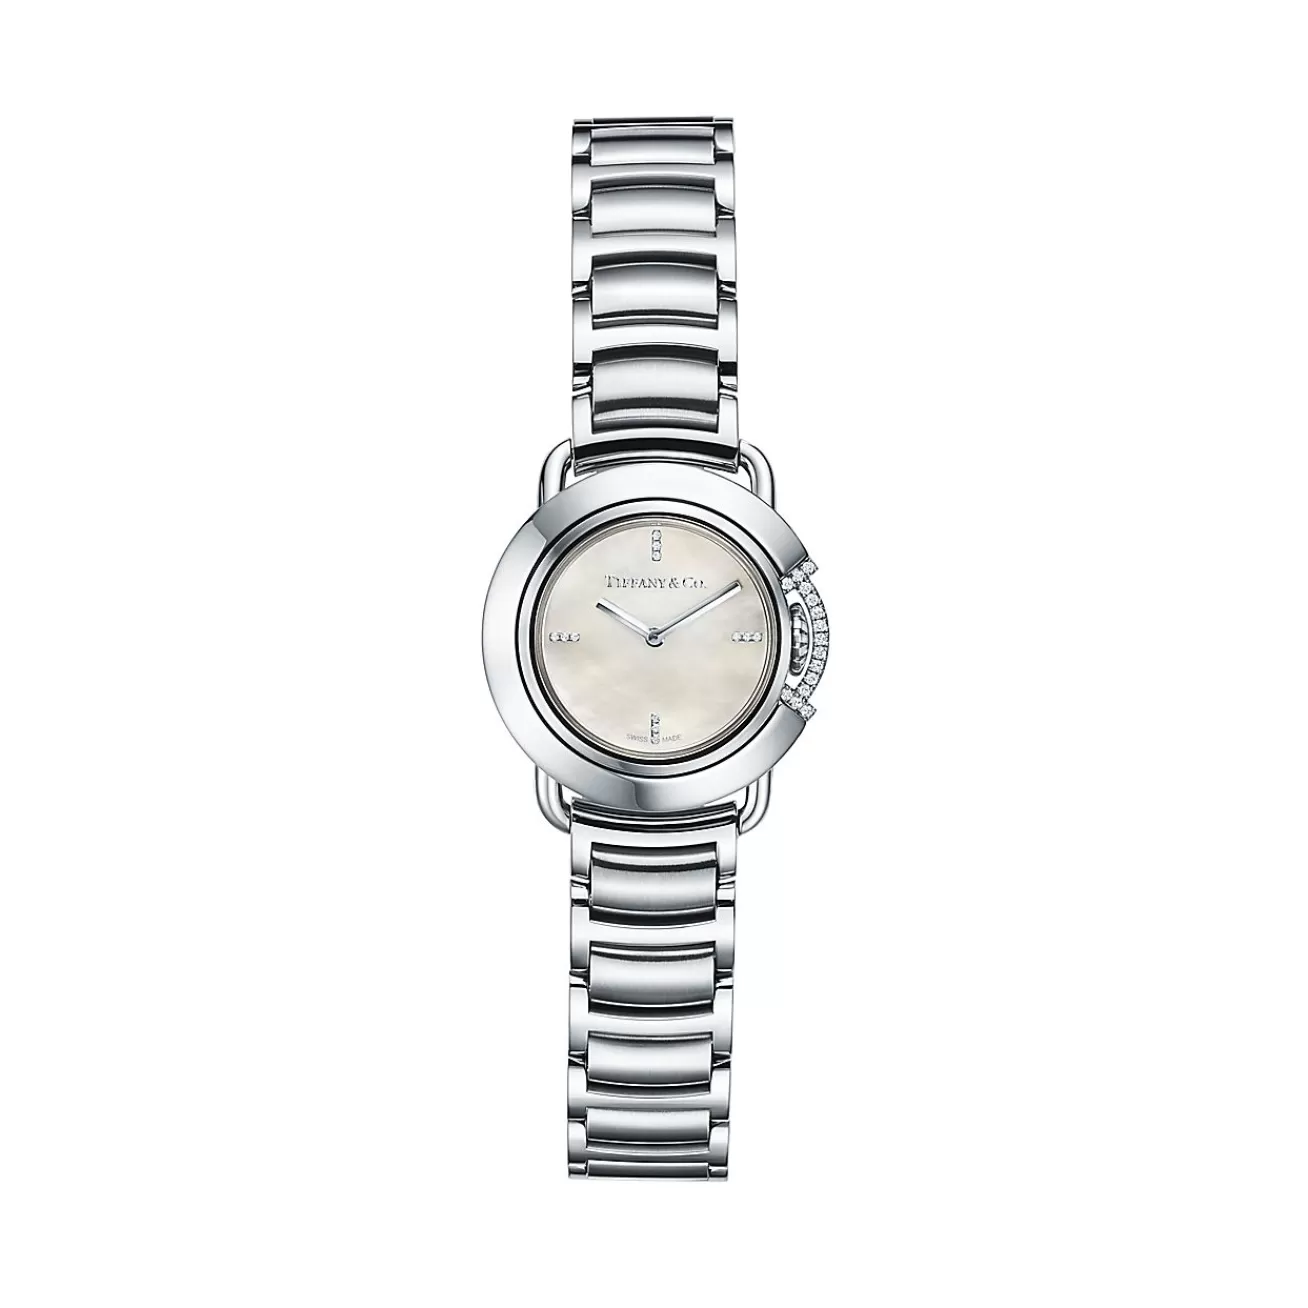 Tiffany & Co. Tiffany T Limited-edition 25 mm Round Watch in Stainless Steel | ^Women Fine Watches | Gifts for Her